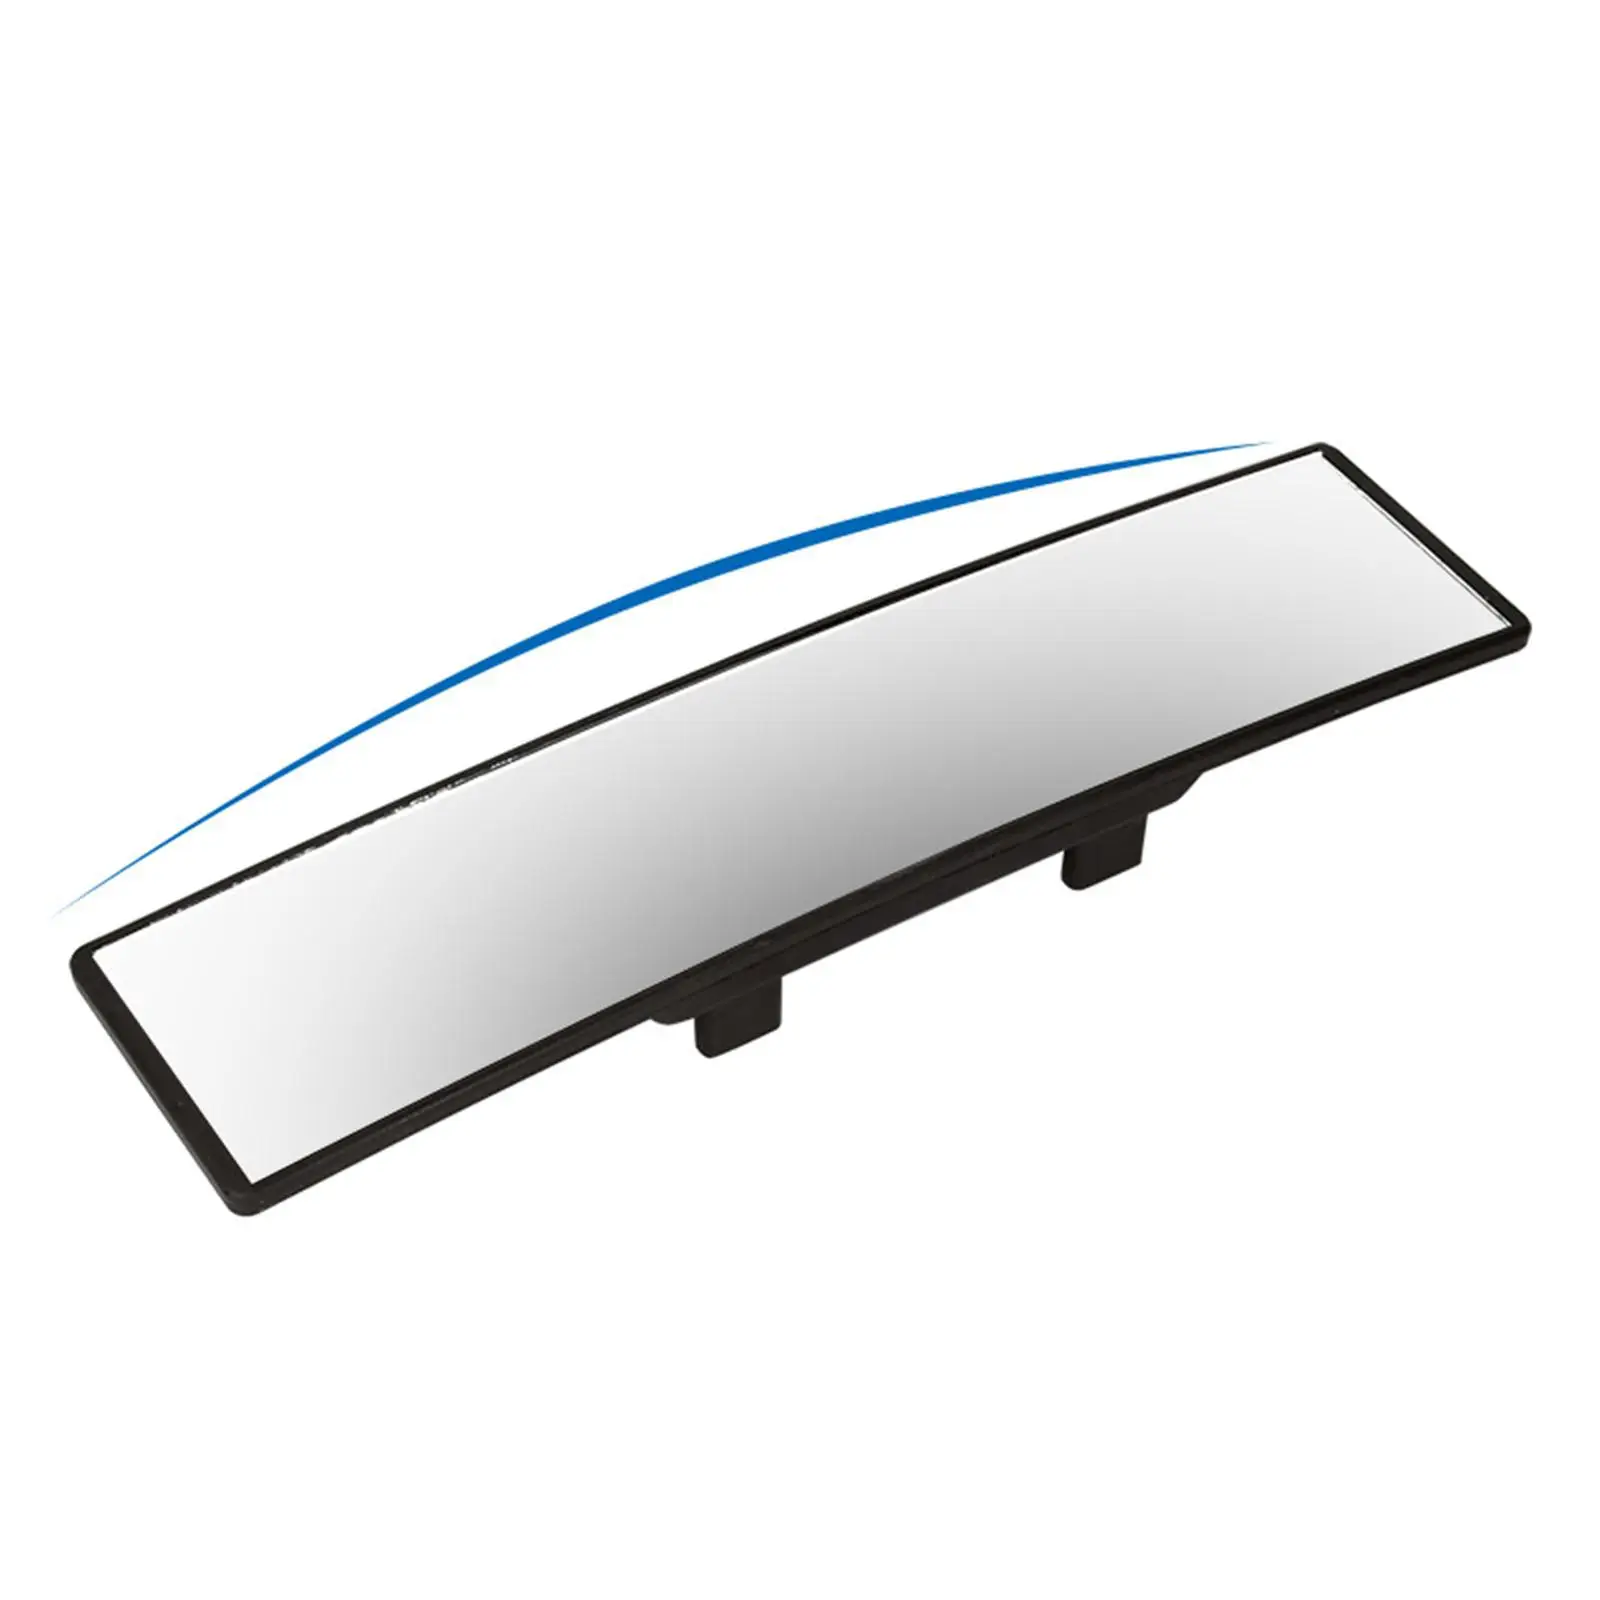 Rear View Mirror Clip on Wide Angle Mirror for Automobile Van Trucks